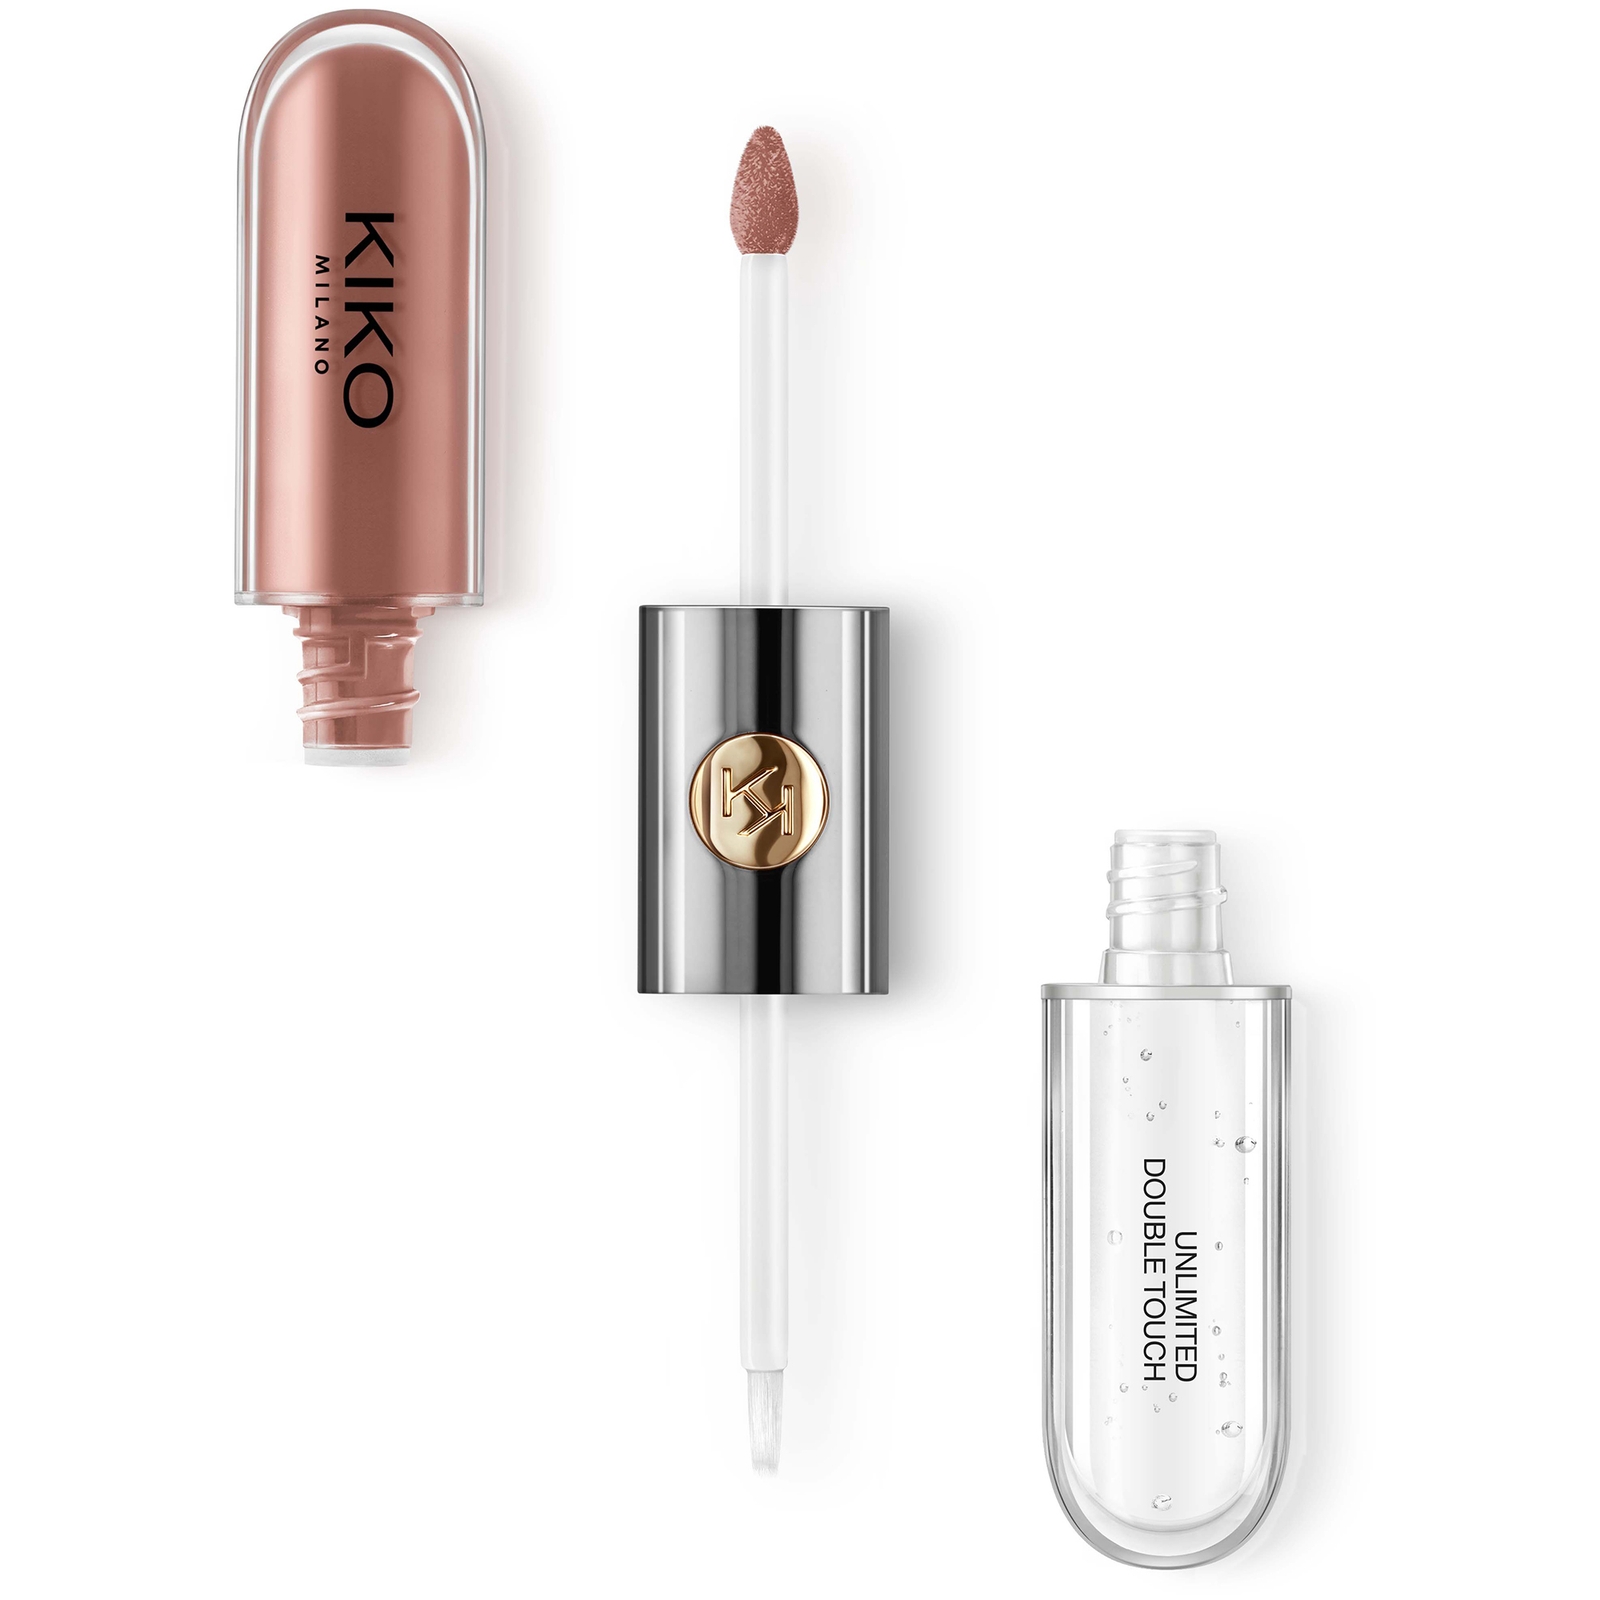 KIKO Milano Unlimited Double Touch 6ml (Various Shades) - 103 Natural Rose